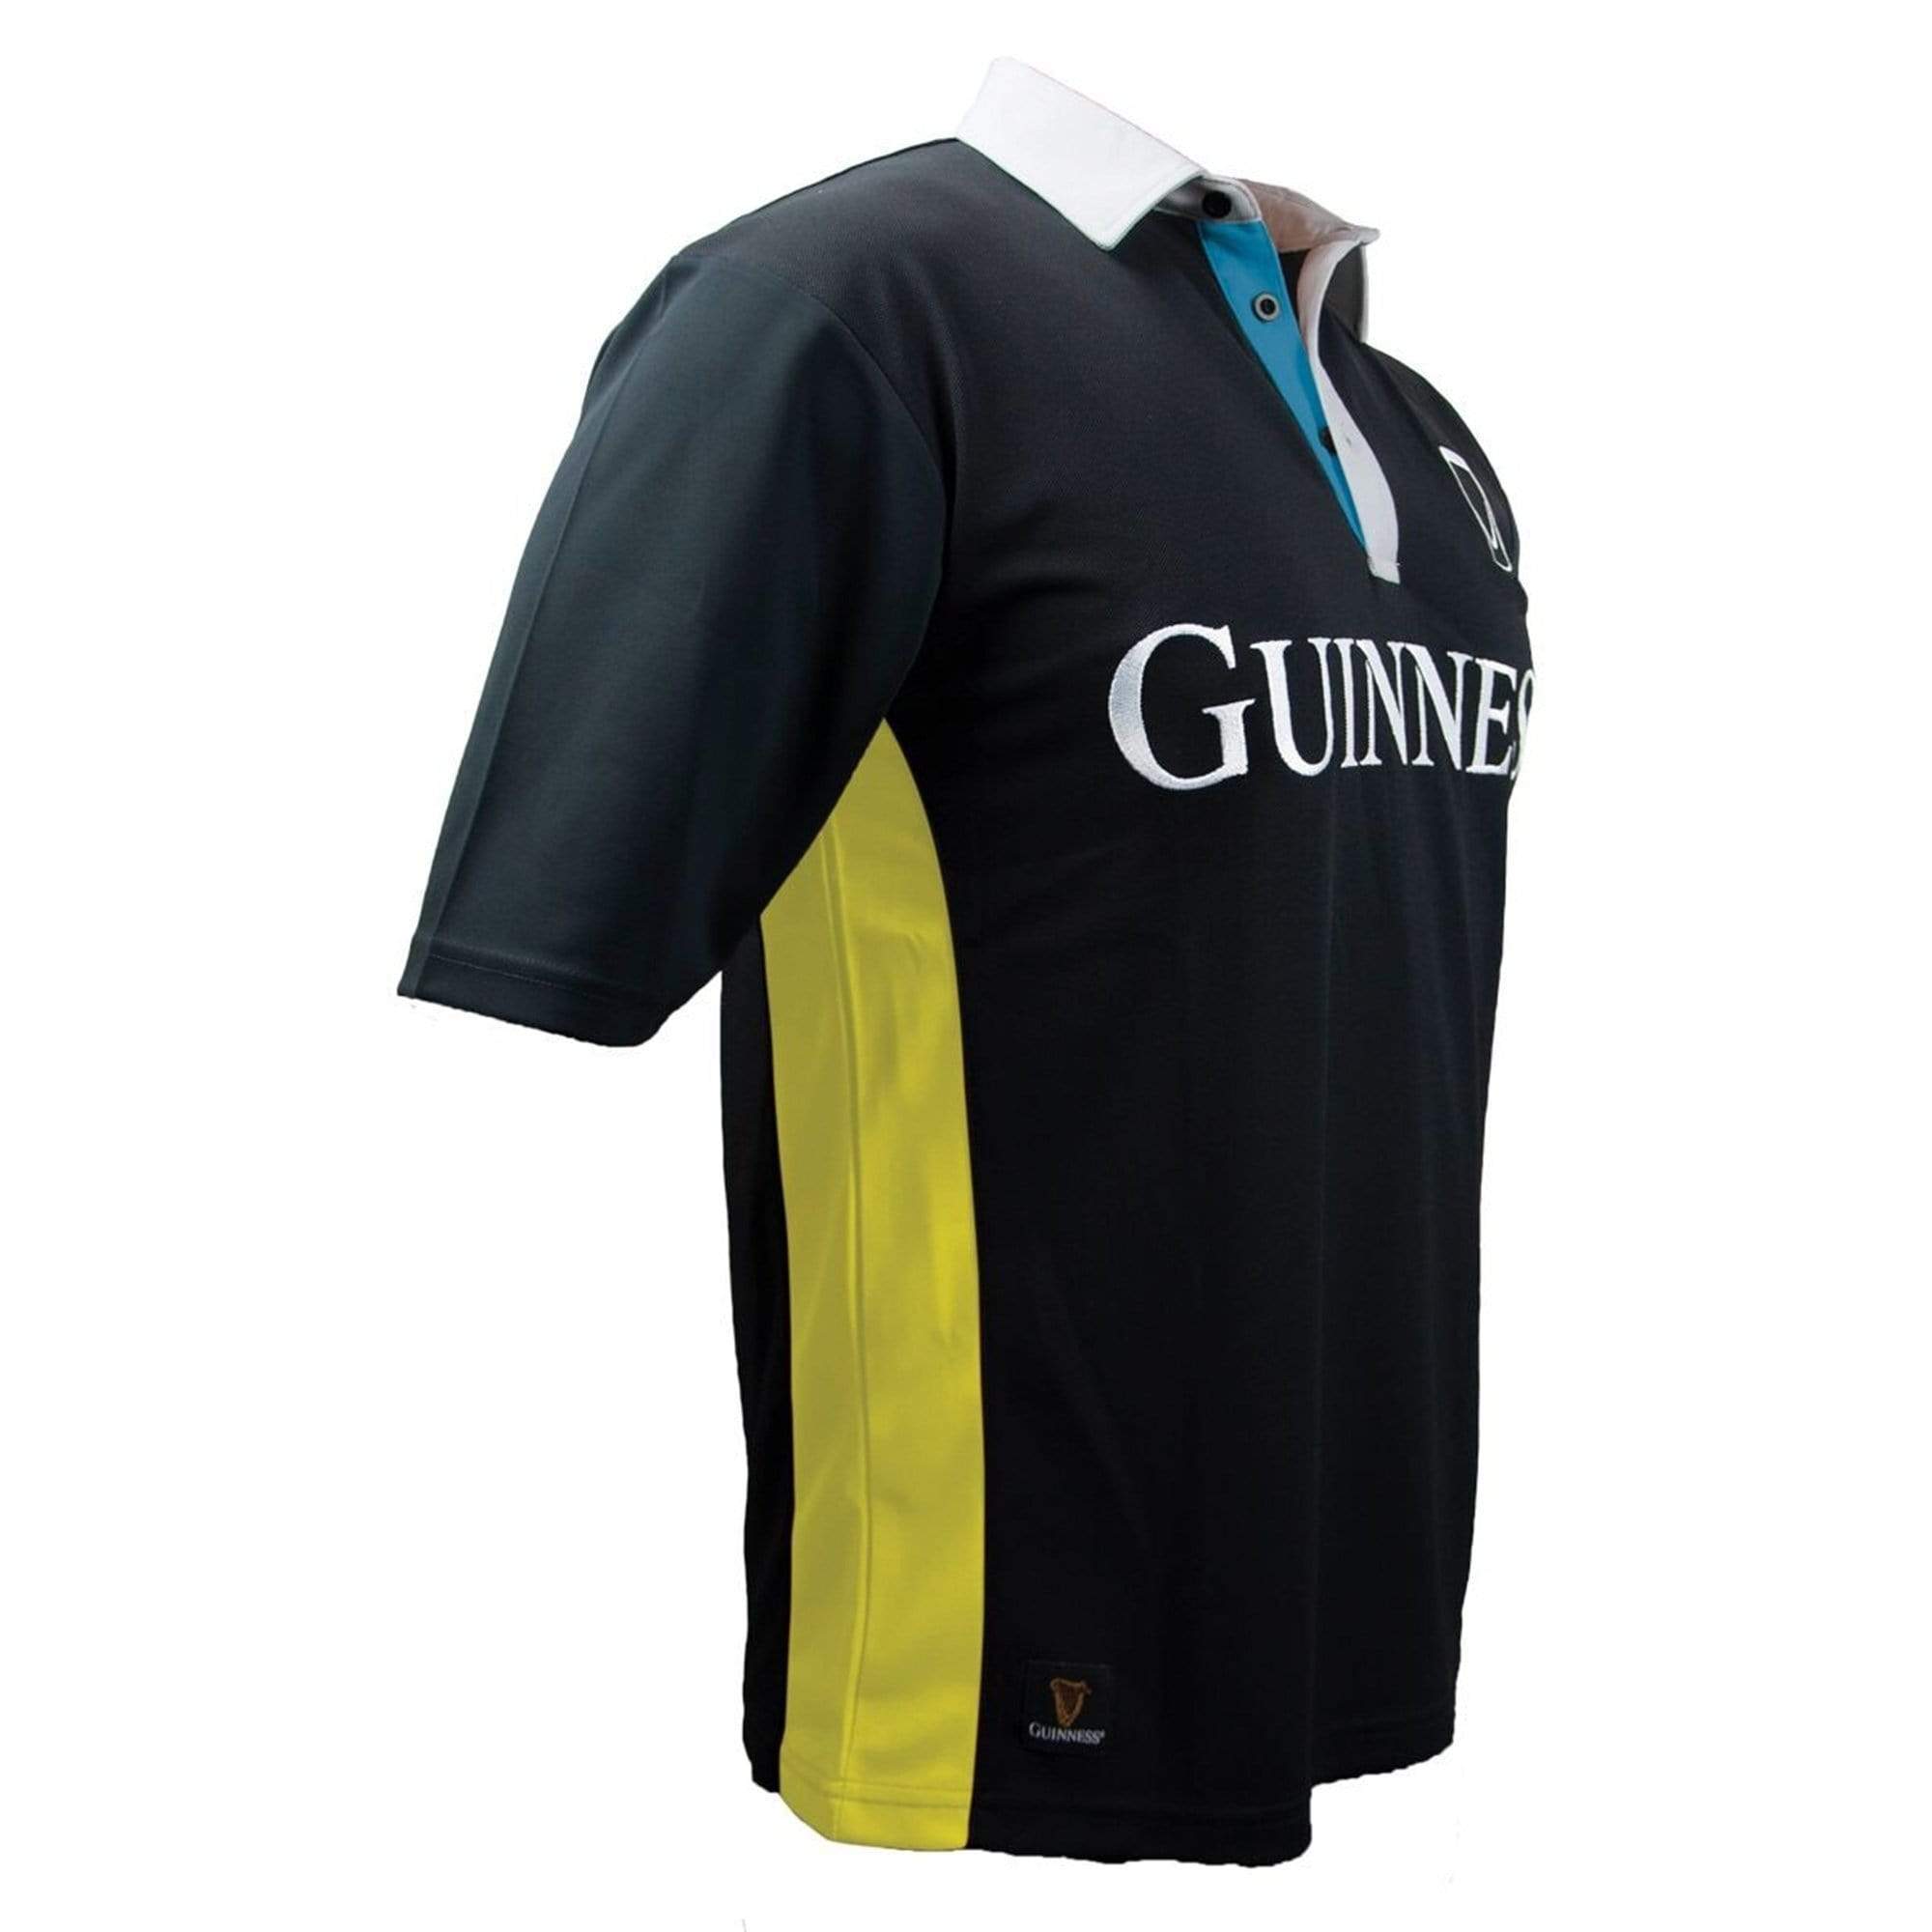 Rugby Imports Guinness Black & Yellow Stripe Rugby Jersey